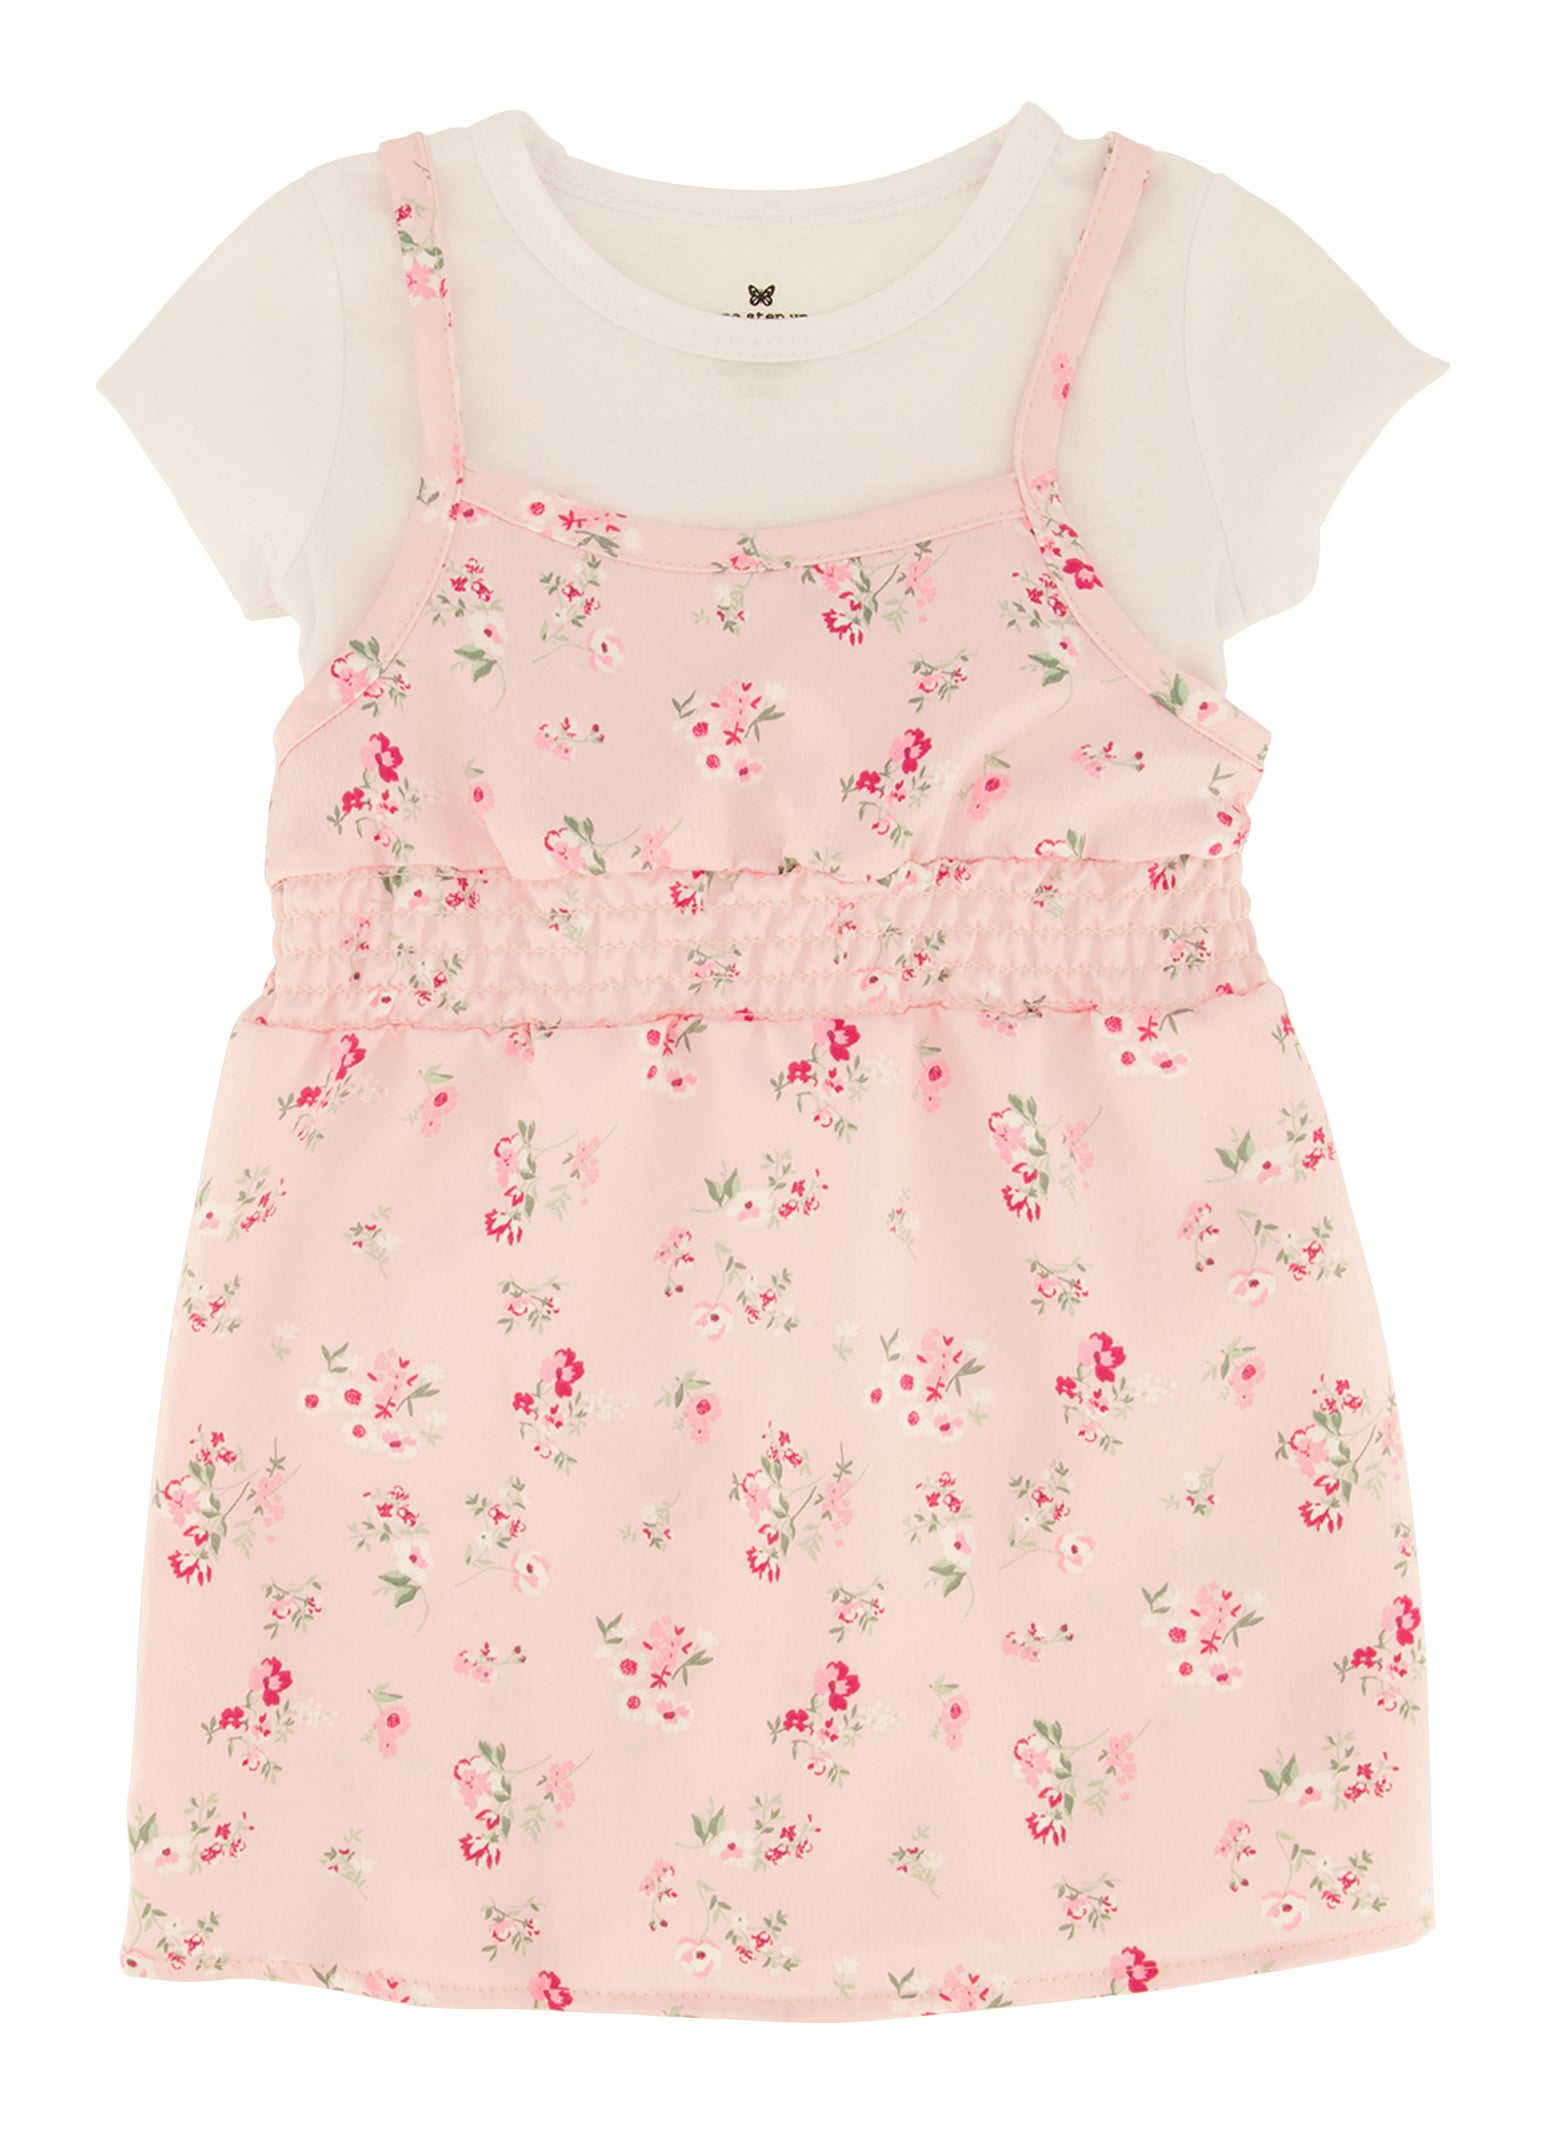 Toddler Girls Floral Print Cami Dress with Short Sleeve Top, Pink, Size 3T